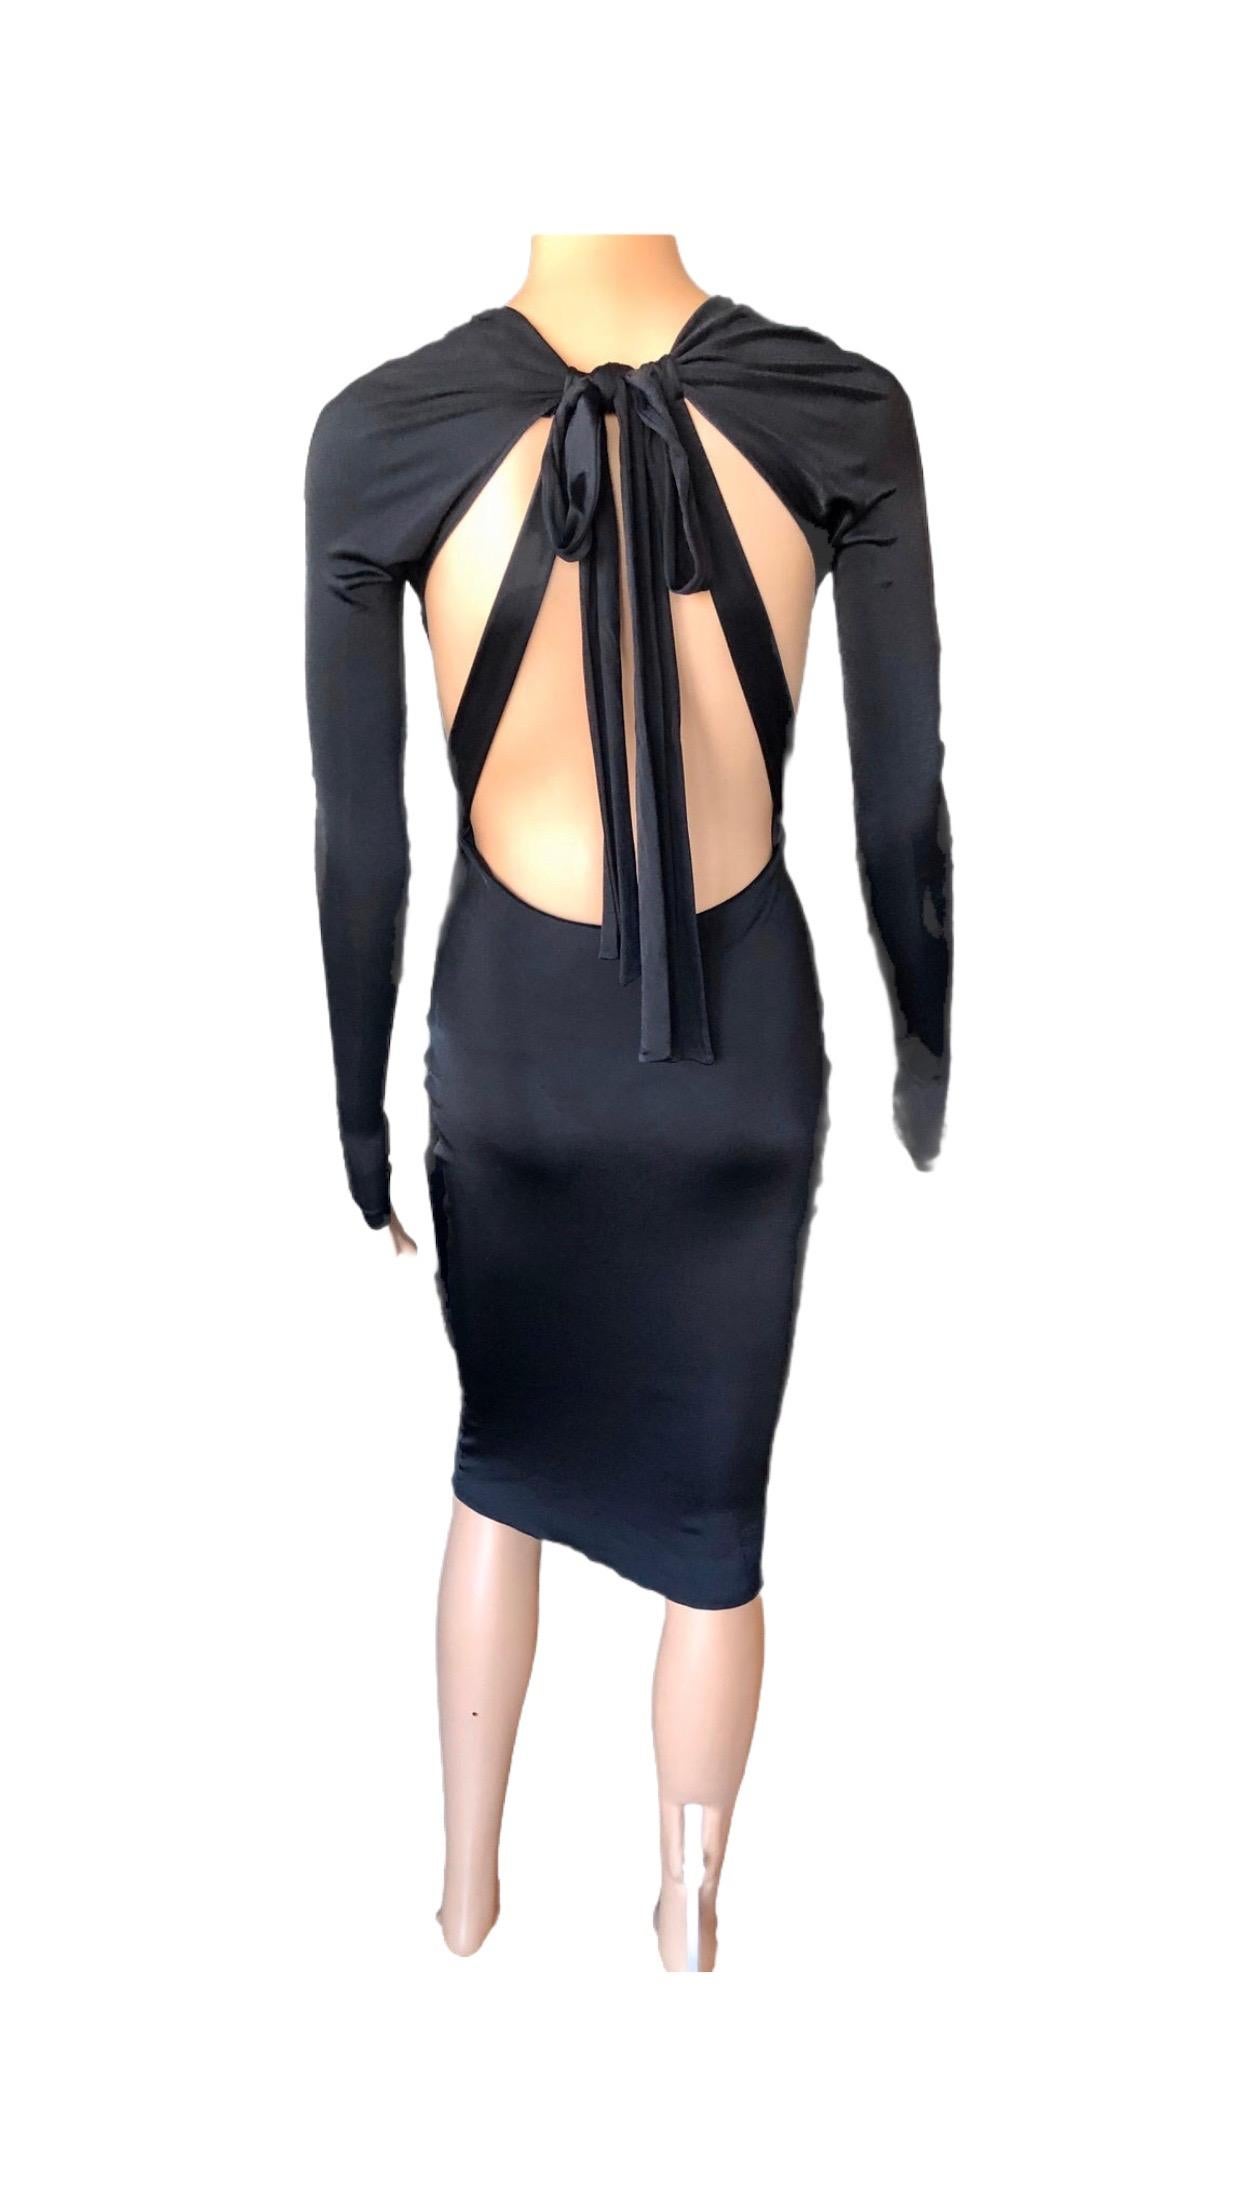 Gucci S/S 2005 Tom Ford Plunging Cutout Backless Bodycon Black Dress en vente 9